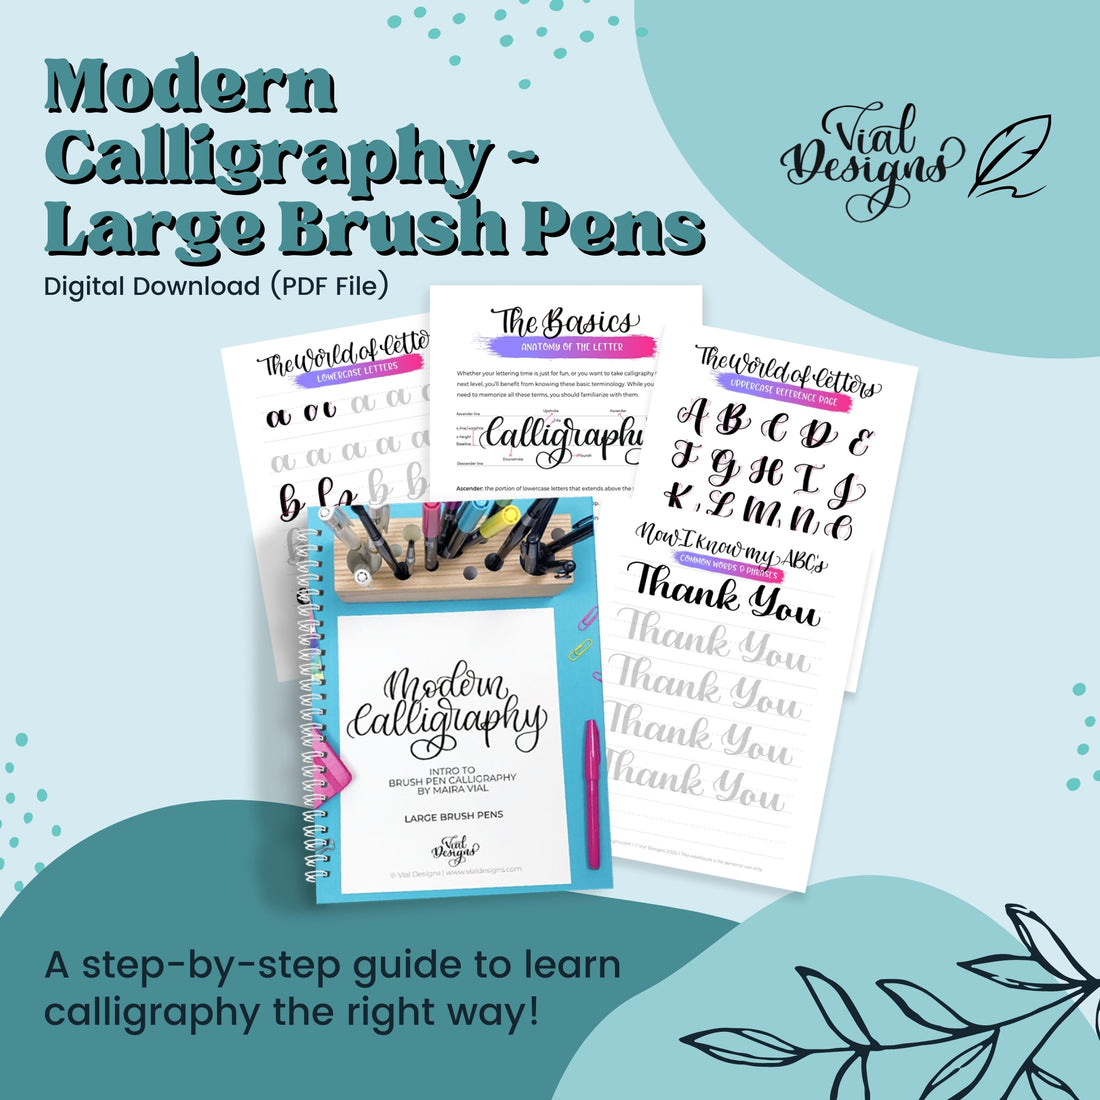 a step-by-step guide to learning modern calligraphy using large brush pens